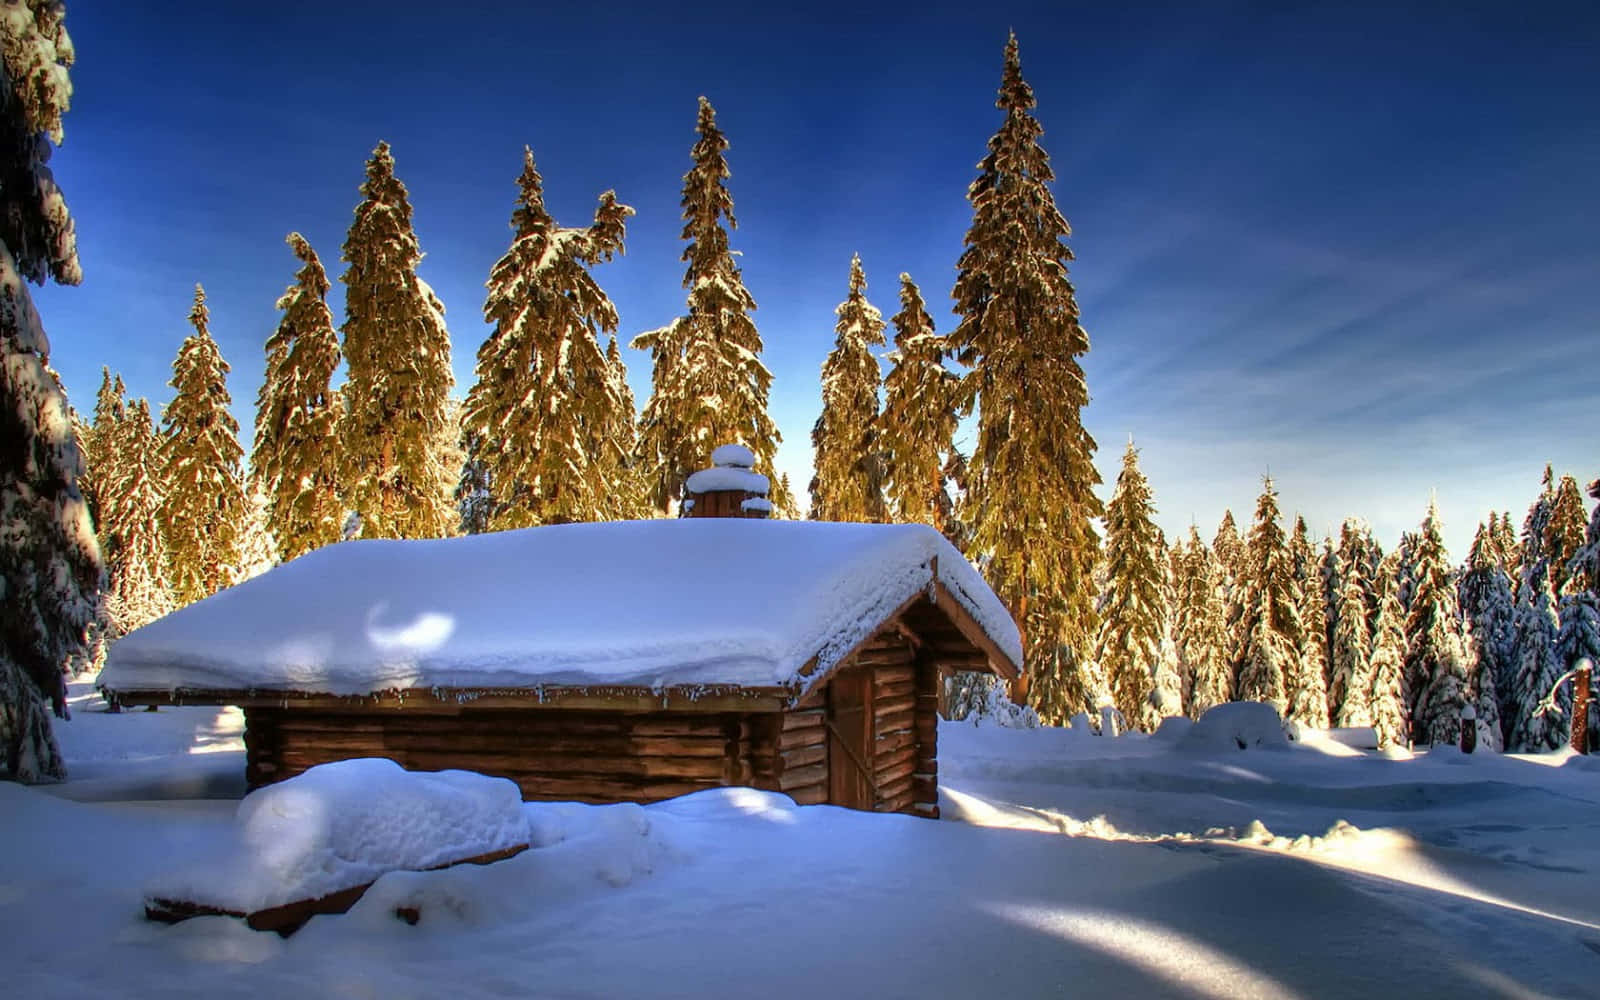 A Small Cabin In The Snow Covered Forest